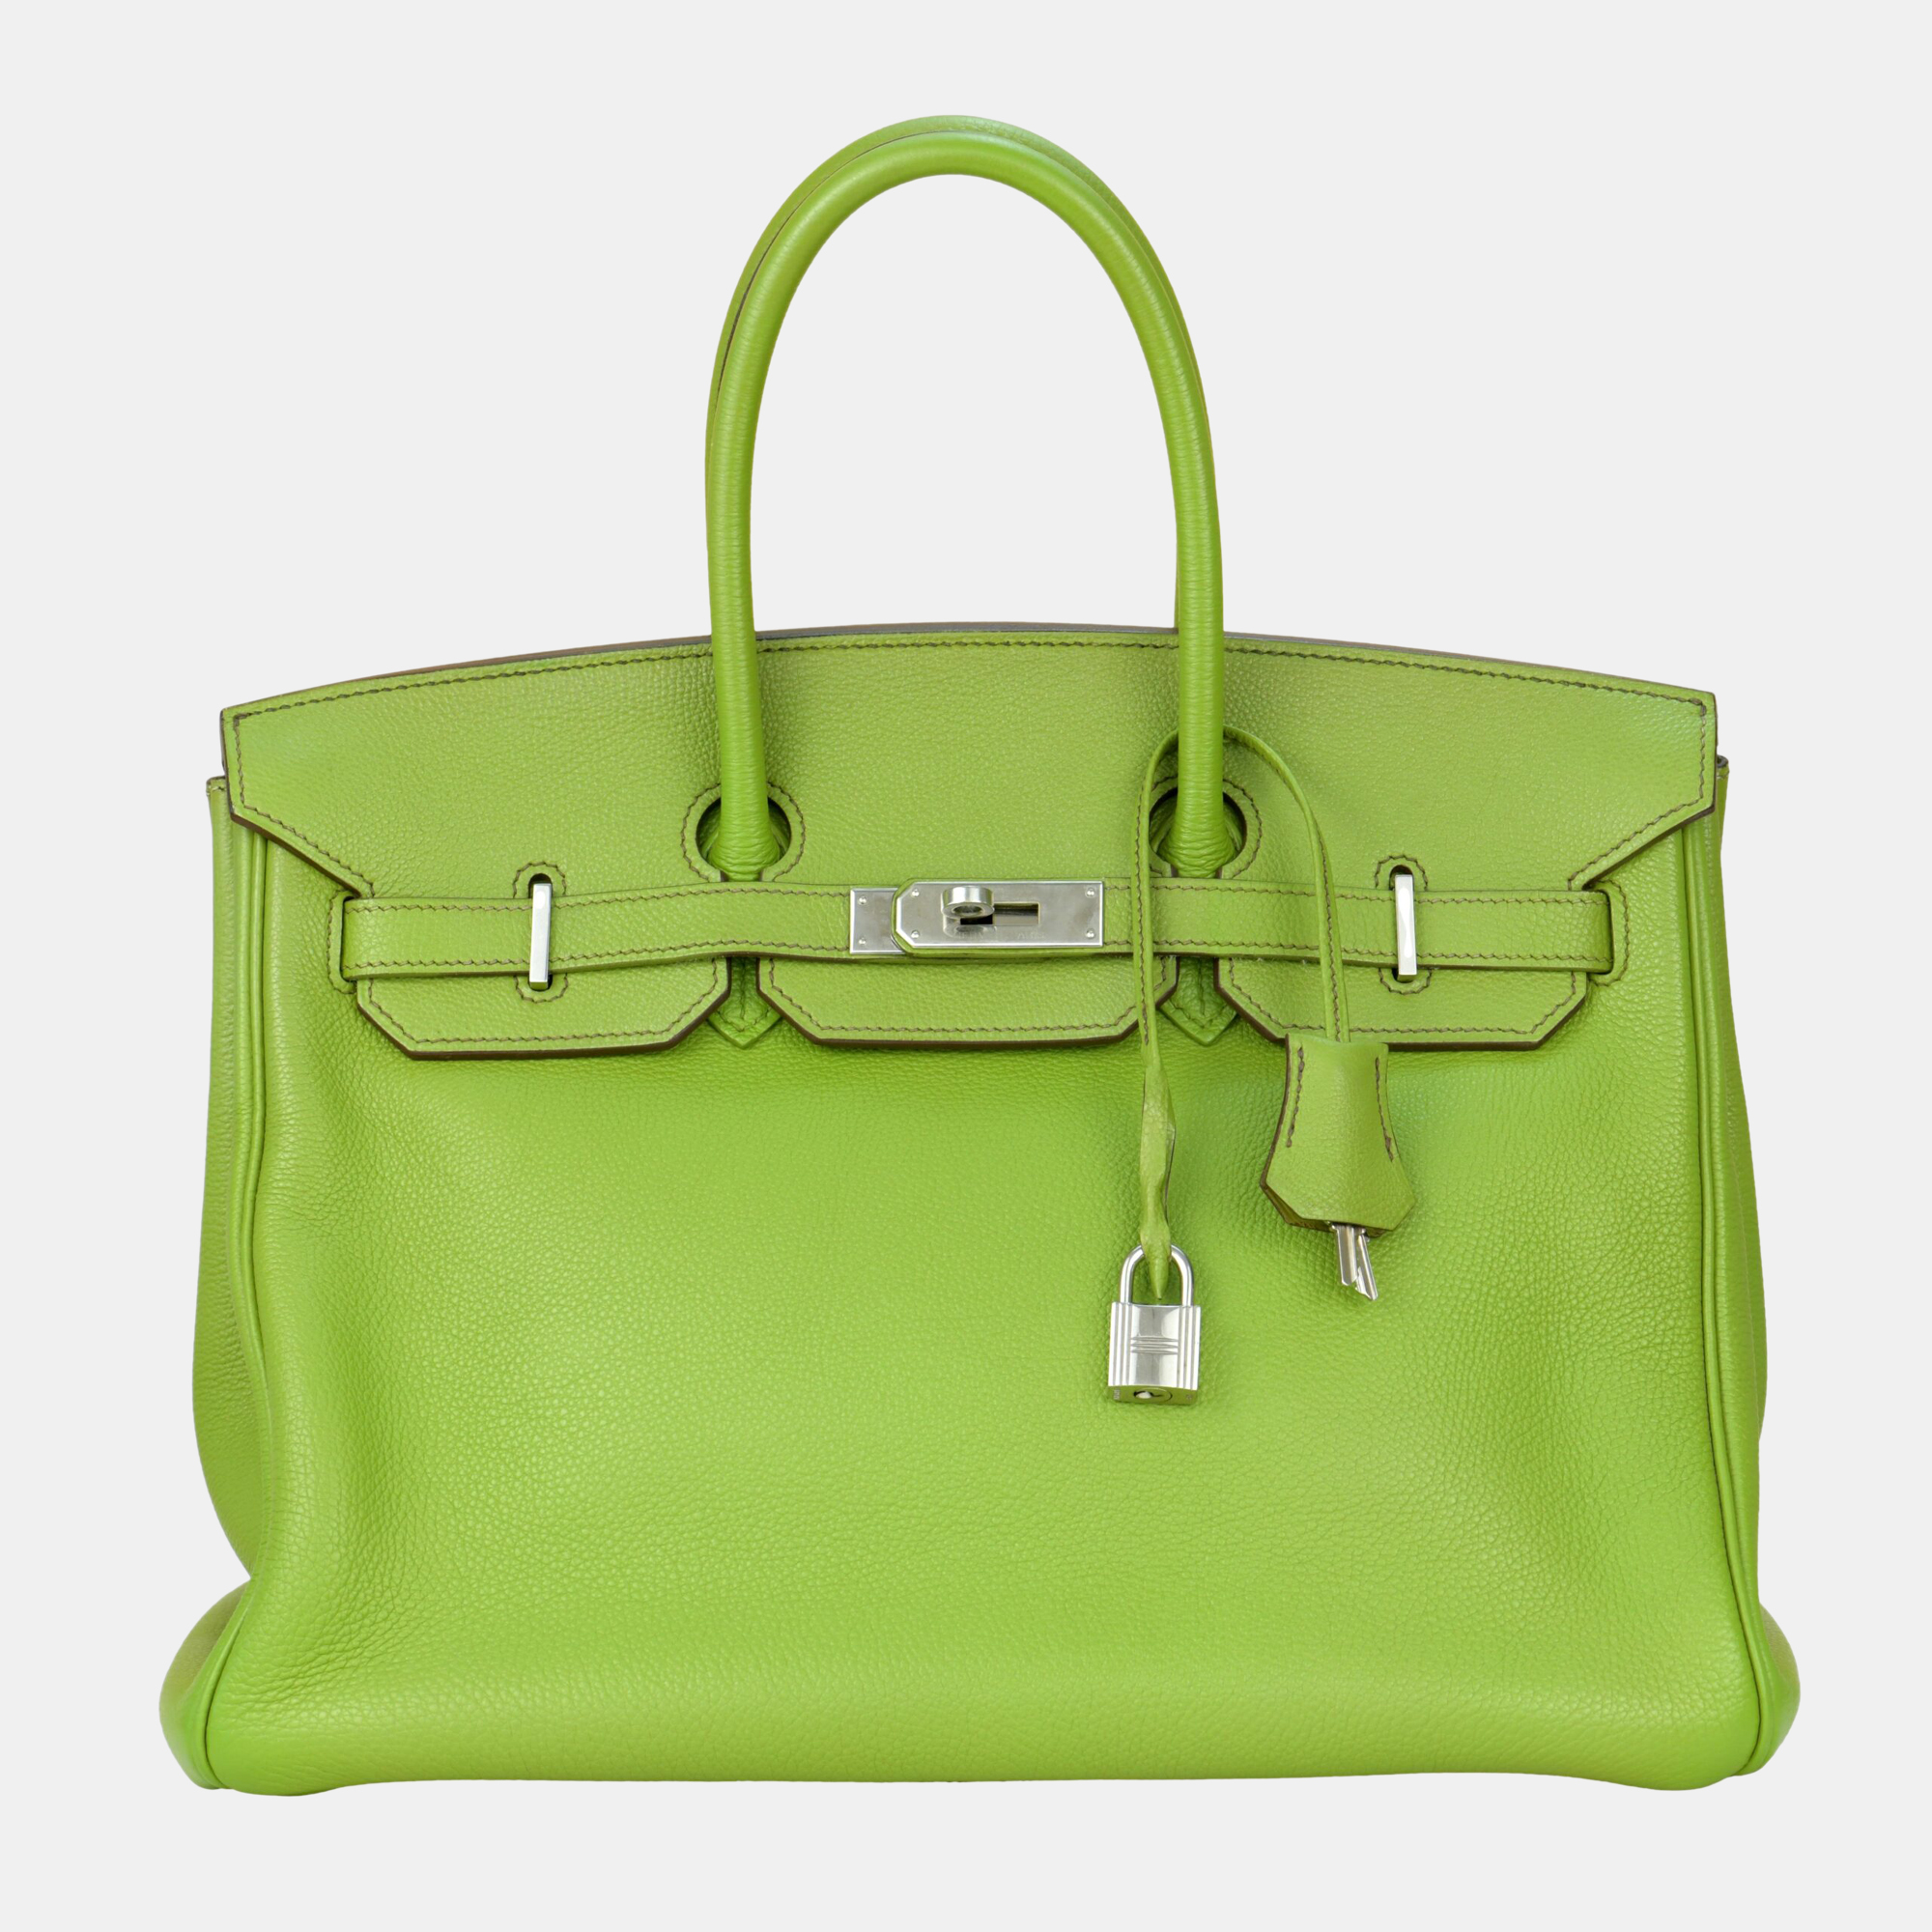 Pre-owned Hermes Anise Green Togo Leather Birkin 35cm With Silver Hardware